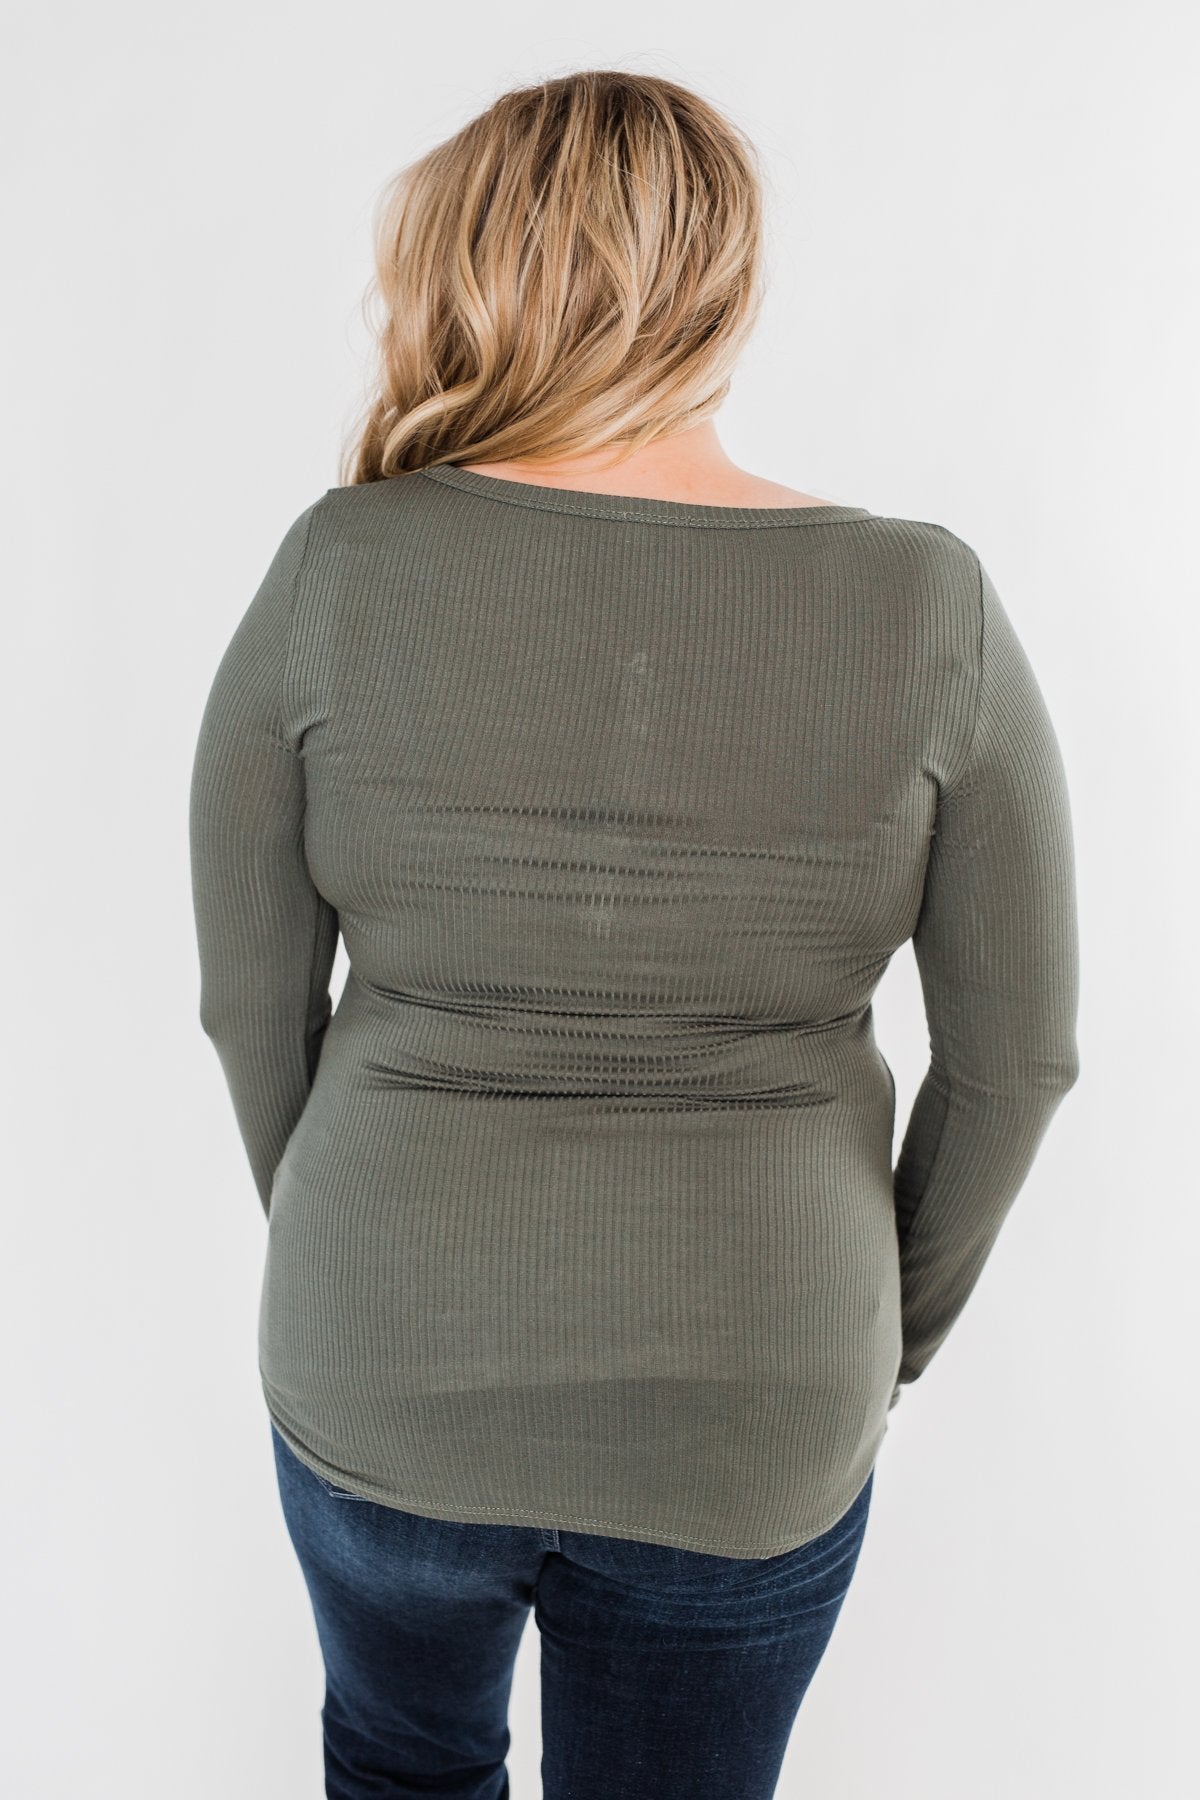 Snap Button Henley Top- Olive